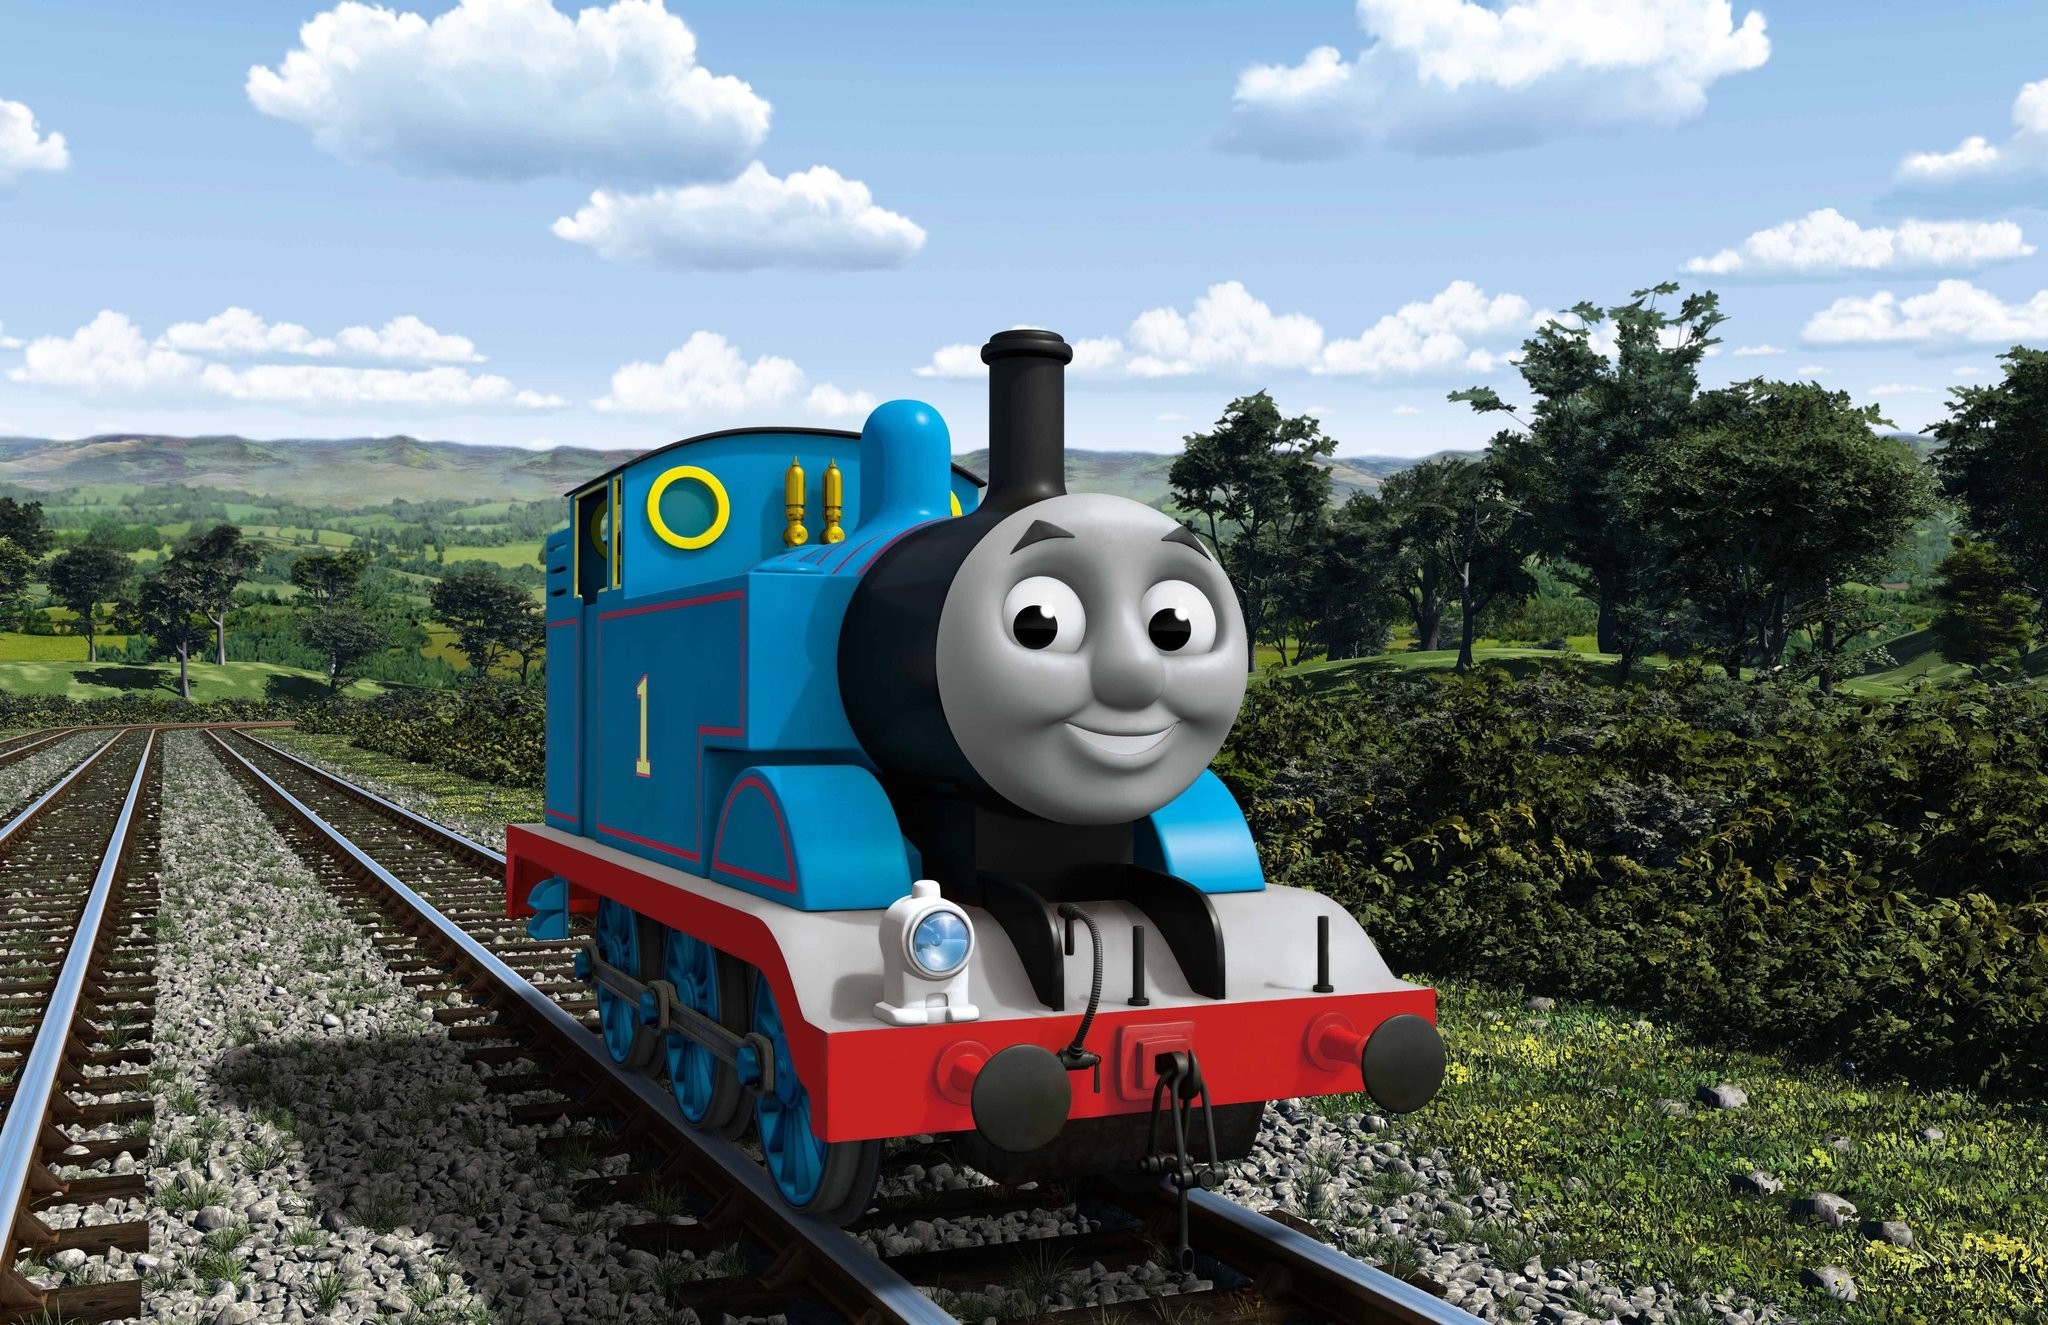 2048x1325 thomas and friends wallpaper hd - Thomas And Friends